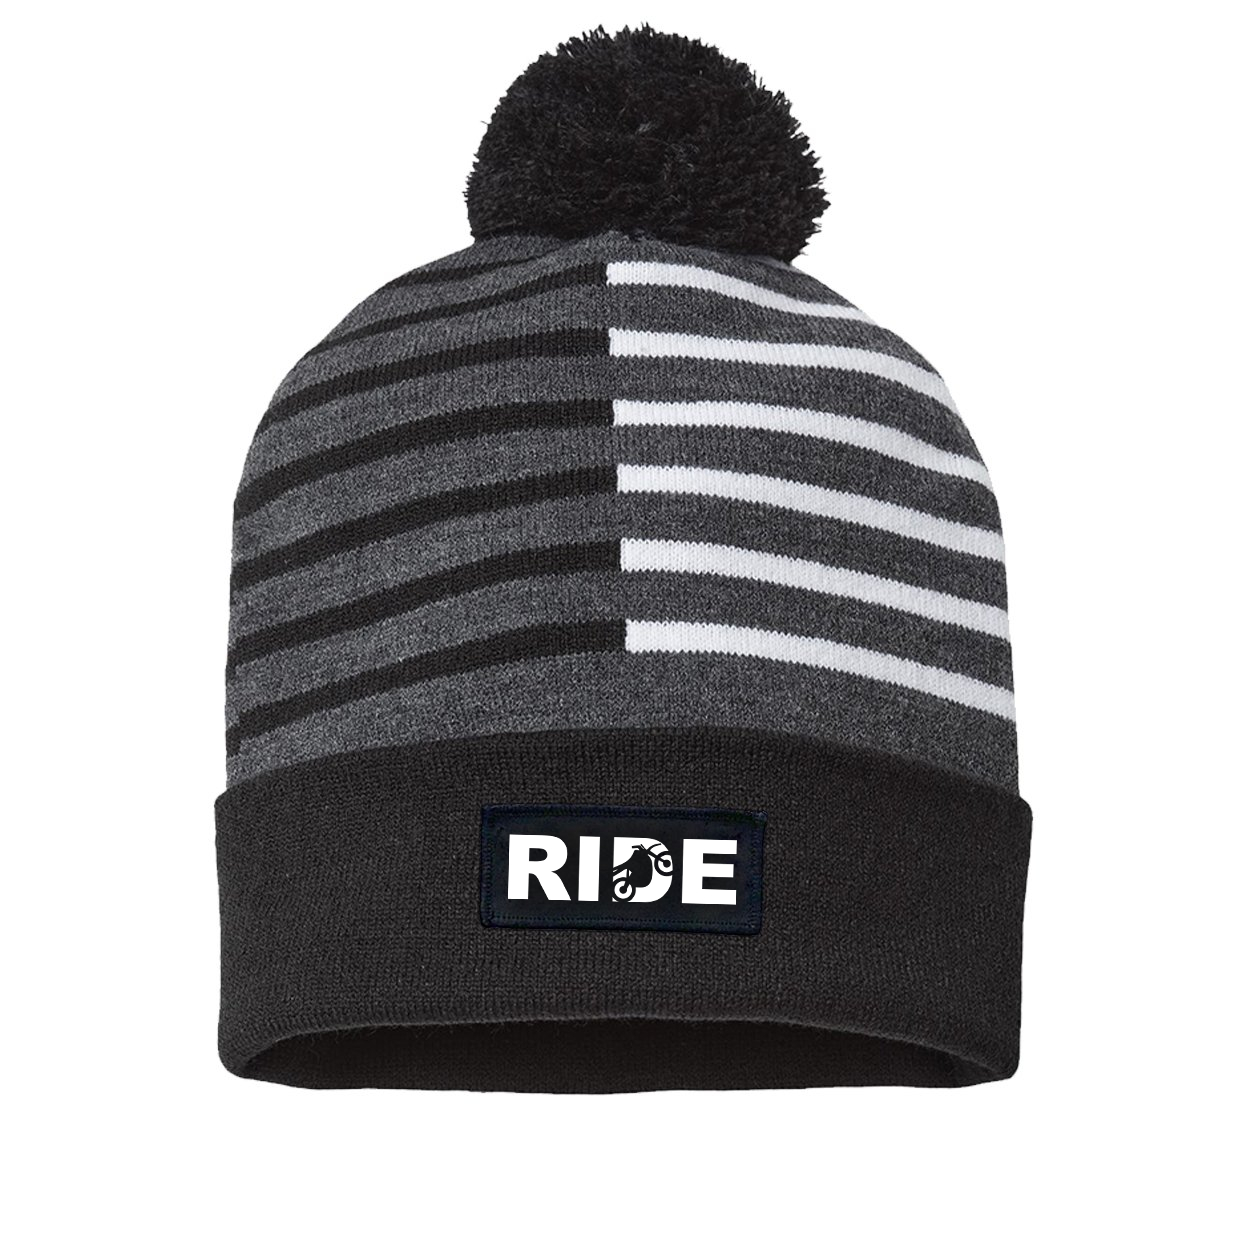 Ride Moto Logo Night Out Woven Patch Roll Up Pom Knit Beanie Half Color Black/White (White Logo)